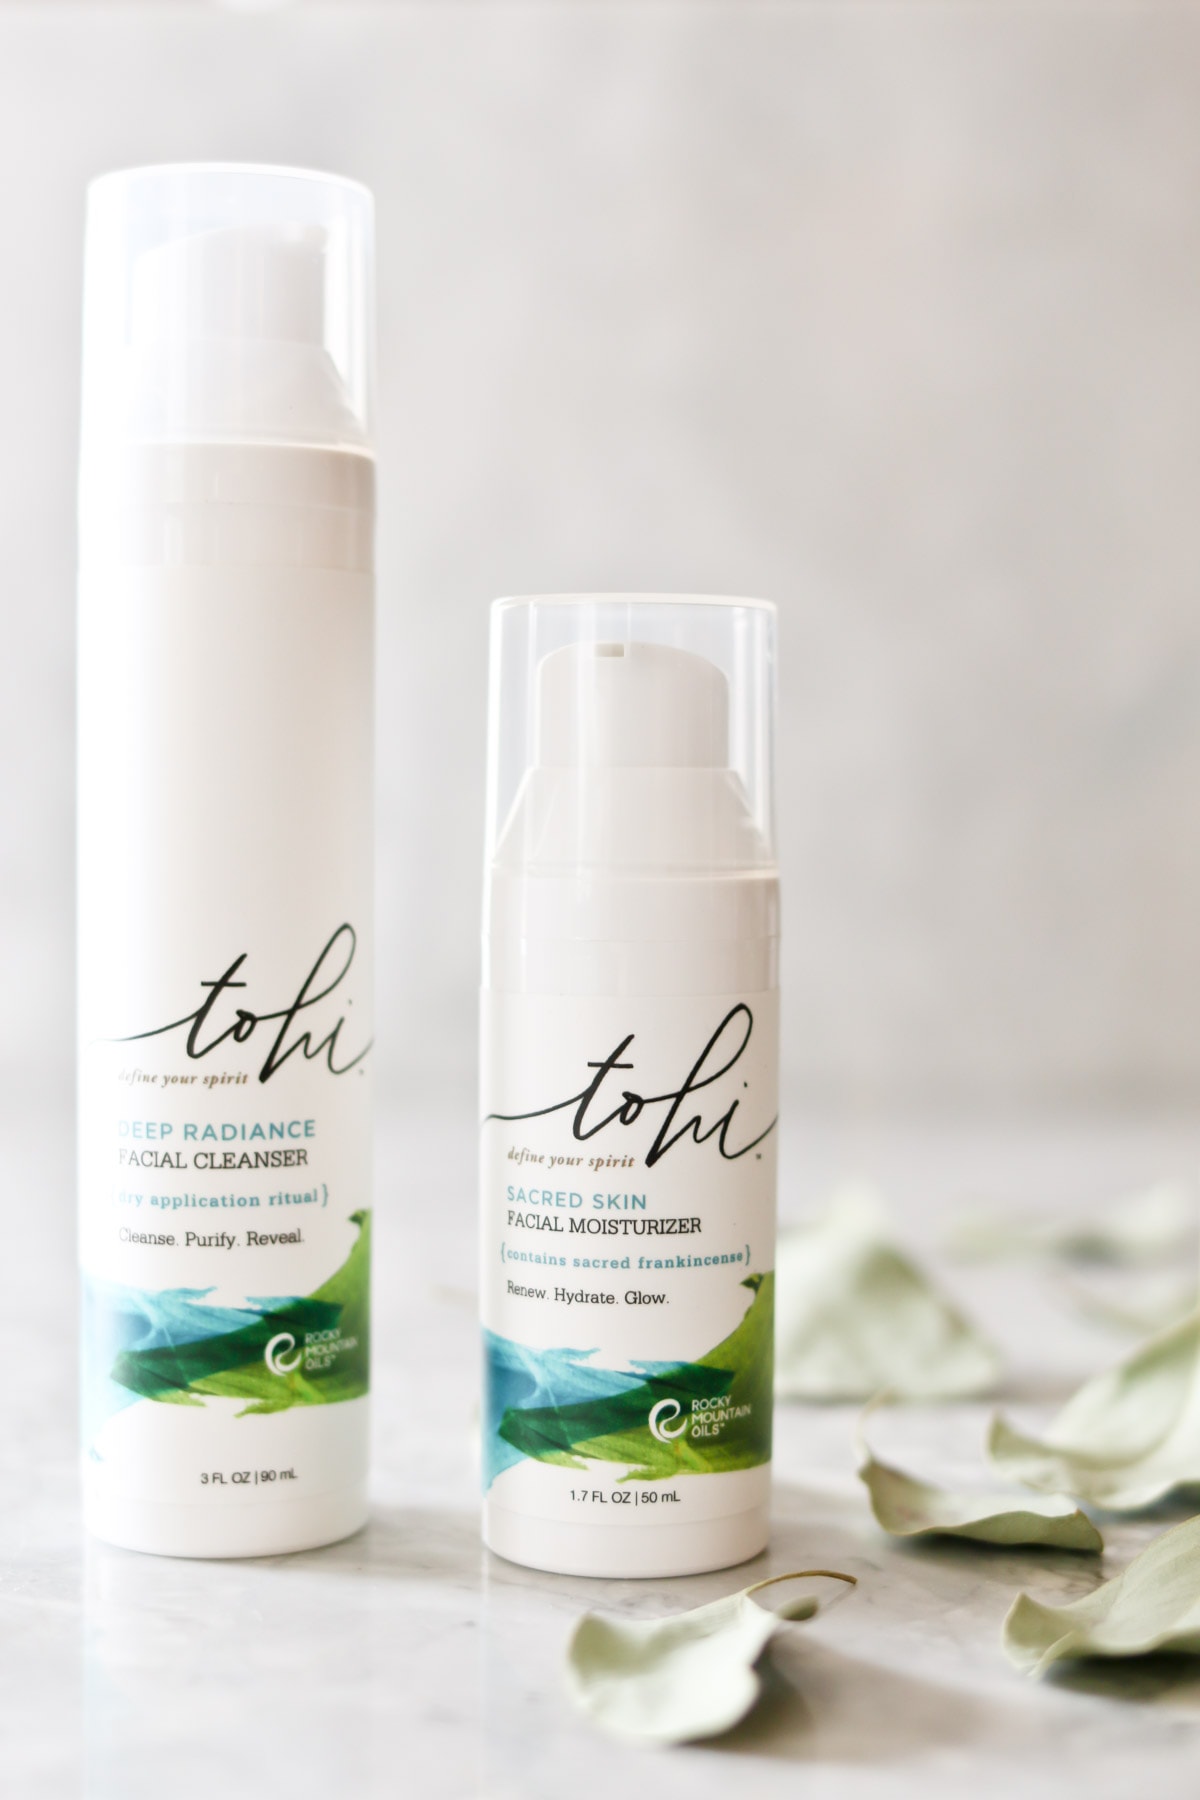 Tohi facial cleanser and moisturizer